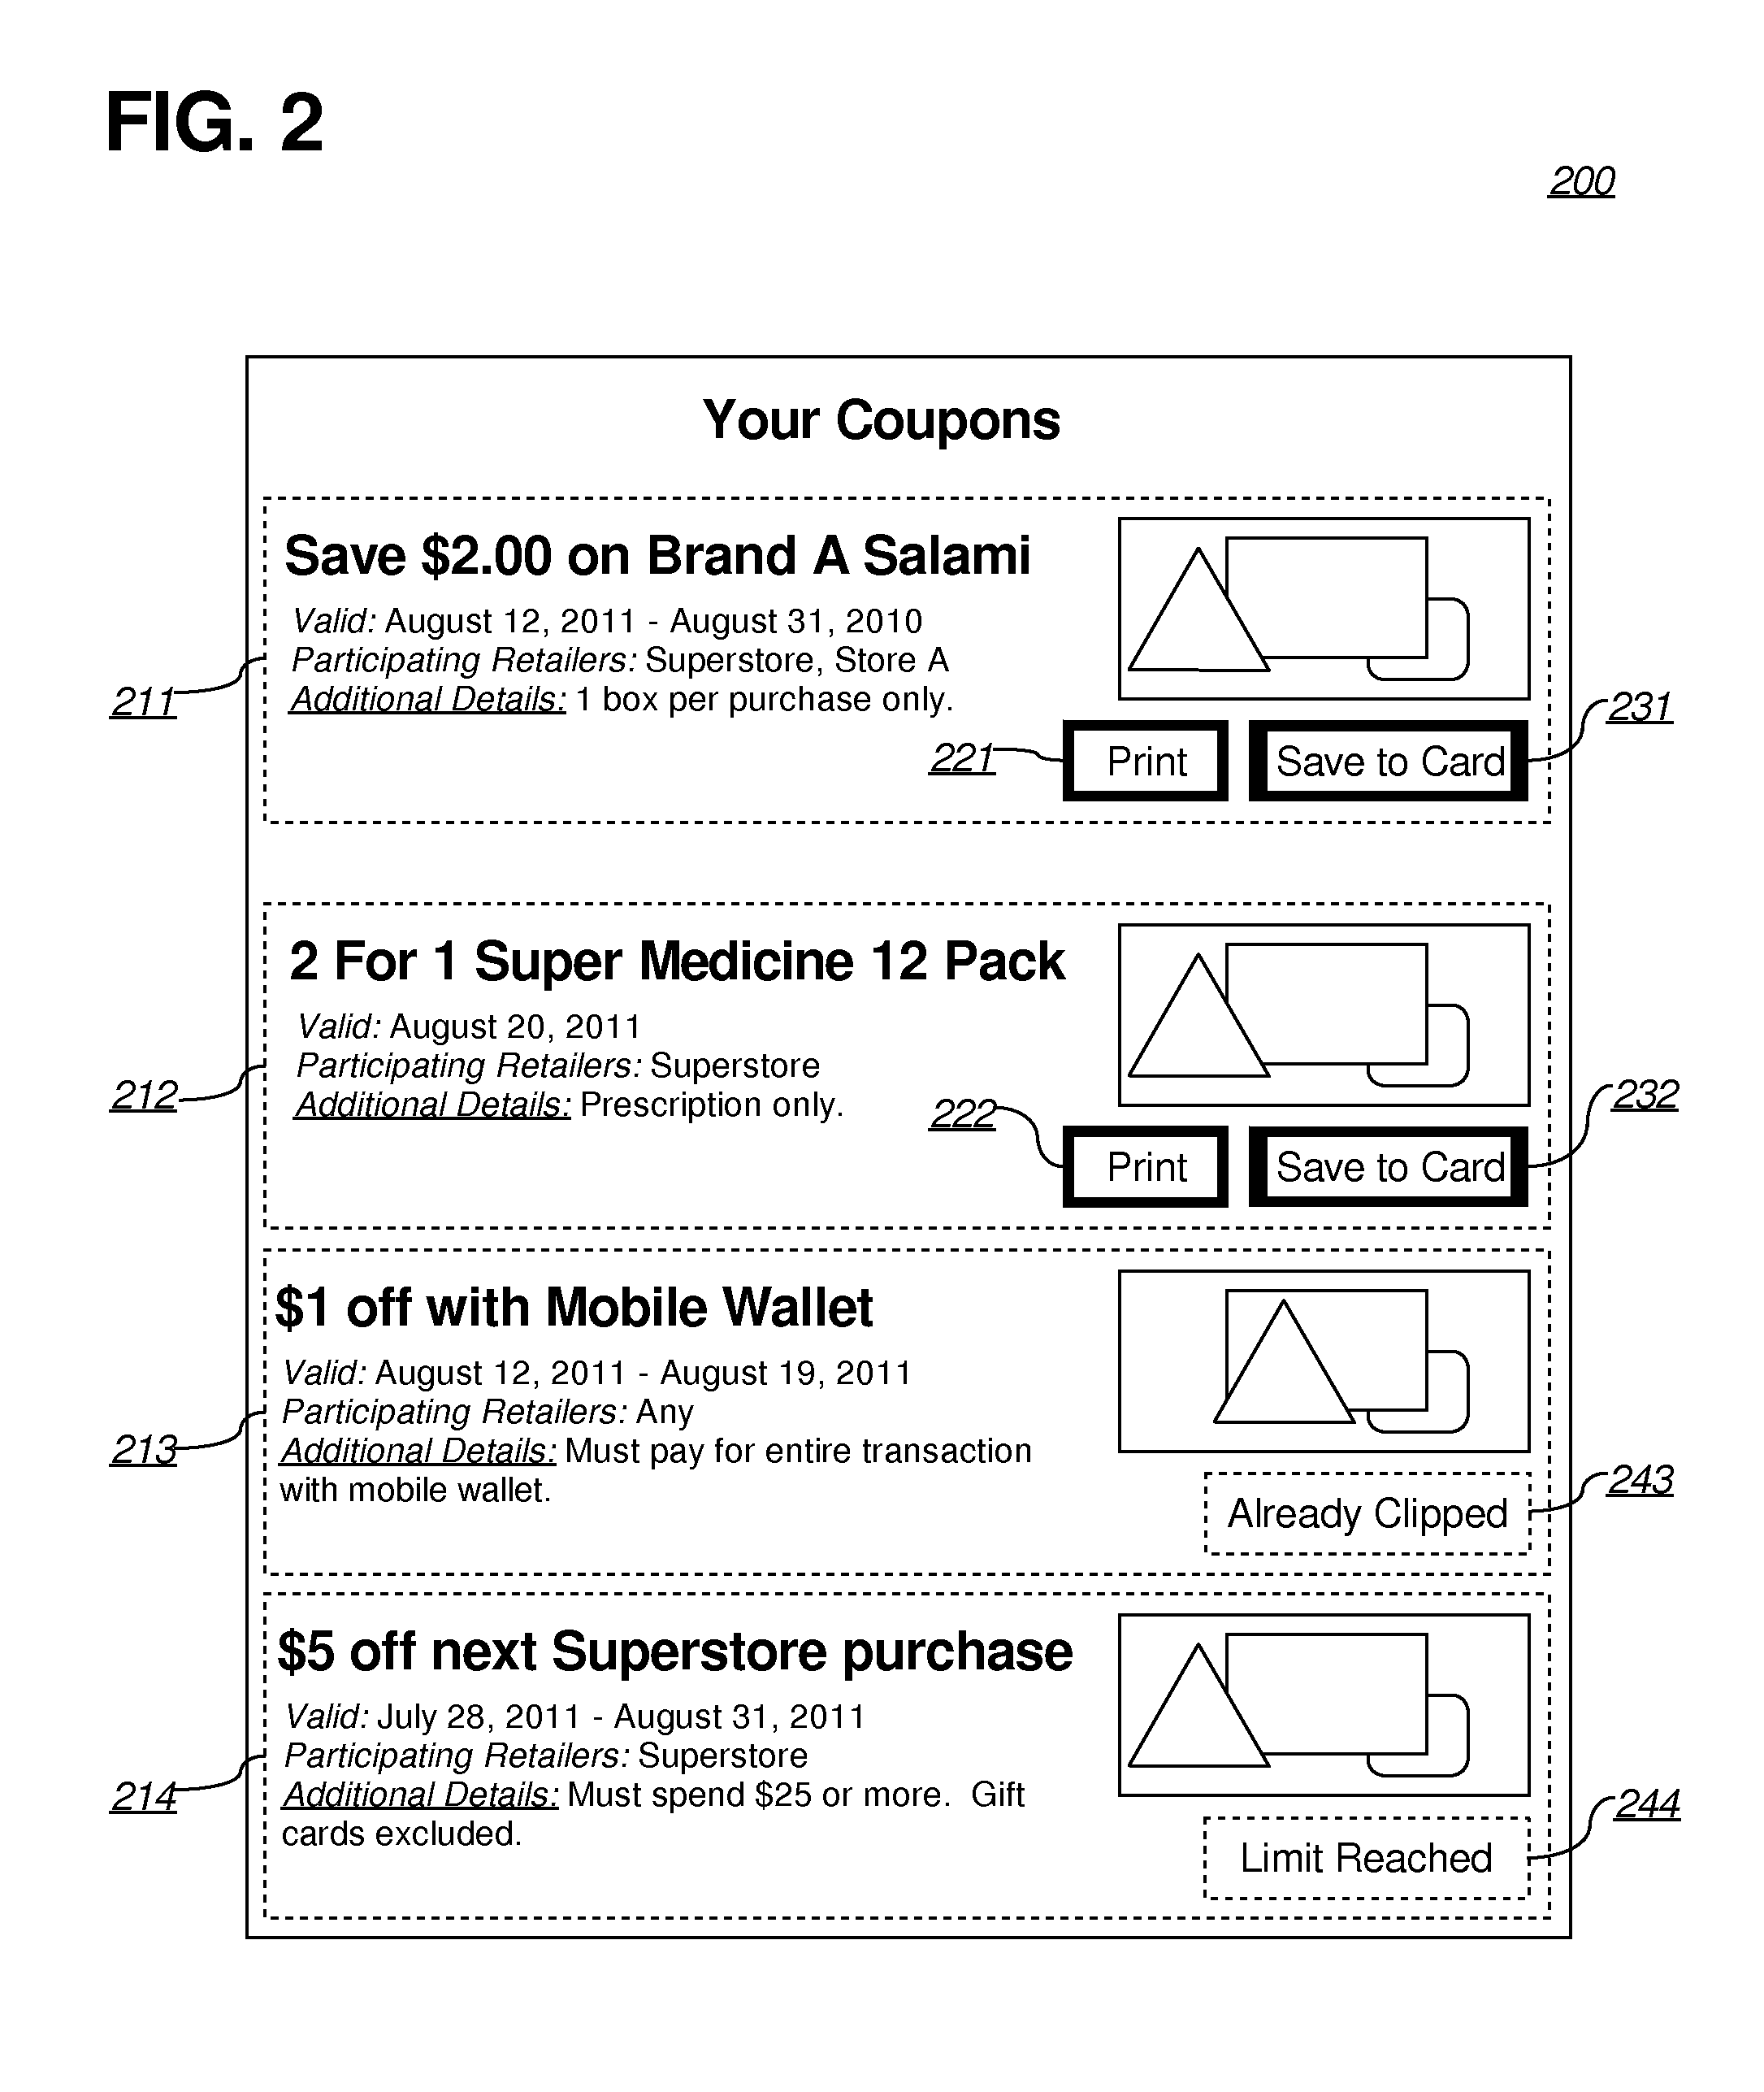 Systems and methods for recommendation of electronic offers